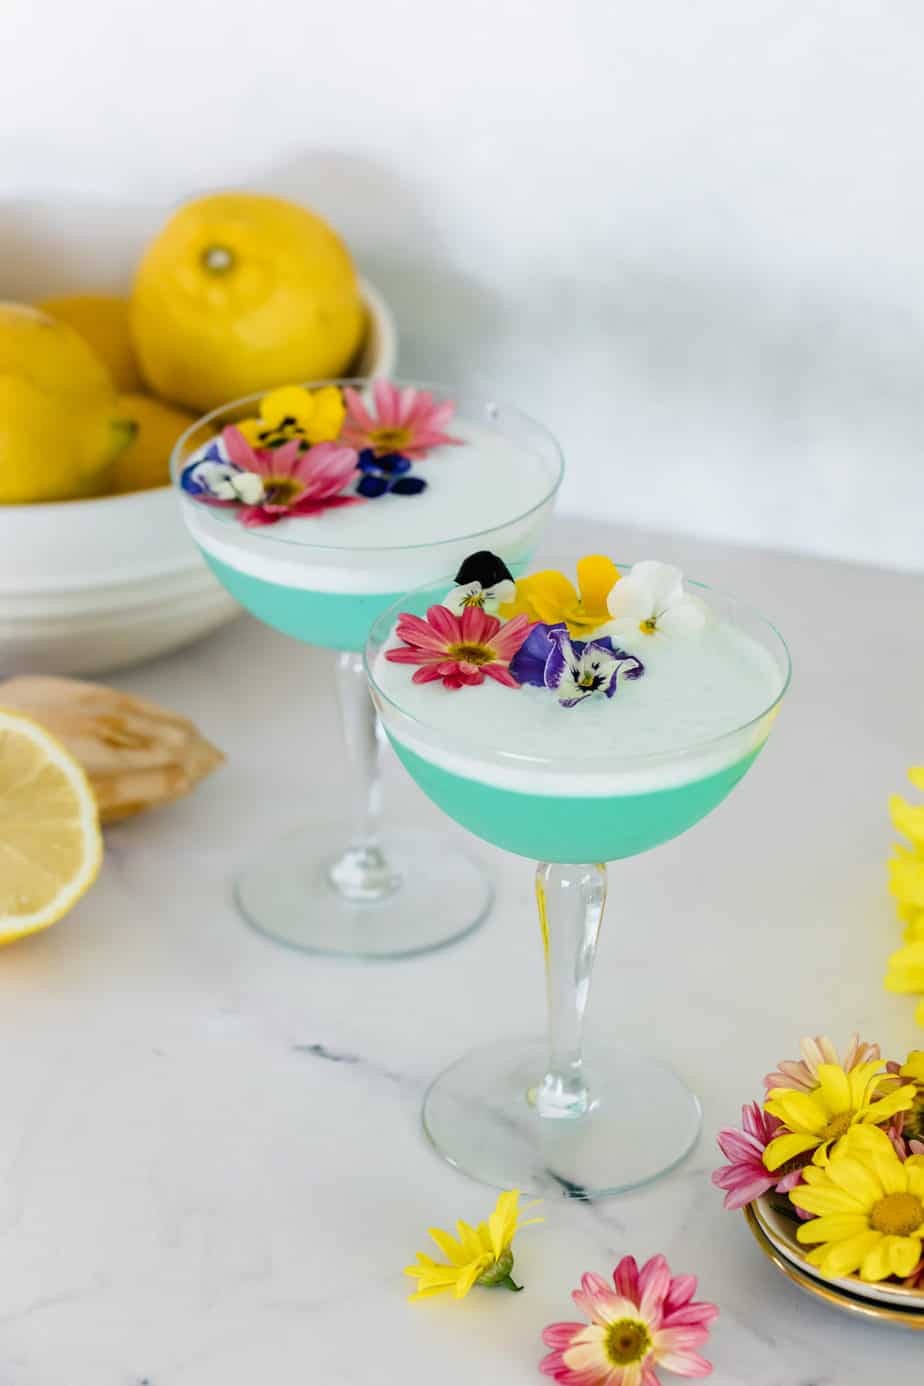 A Blueberry Gin Sour topped with fresh flowers.